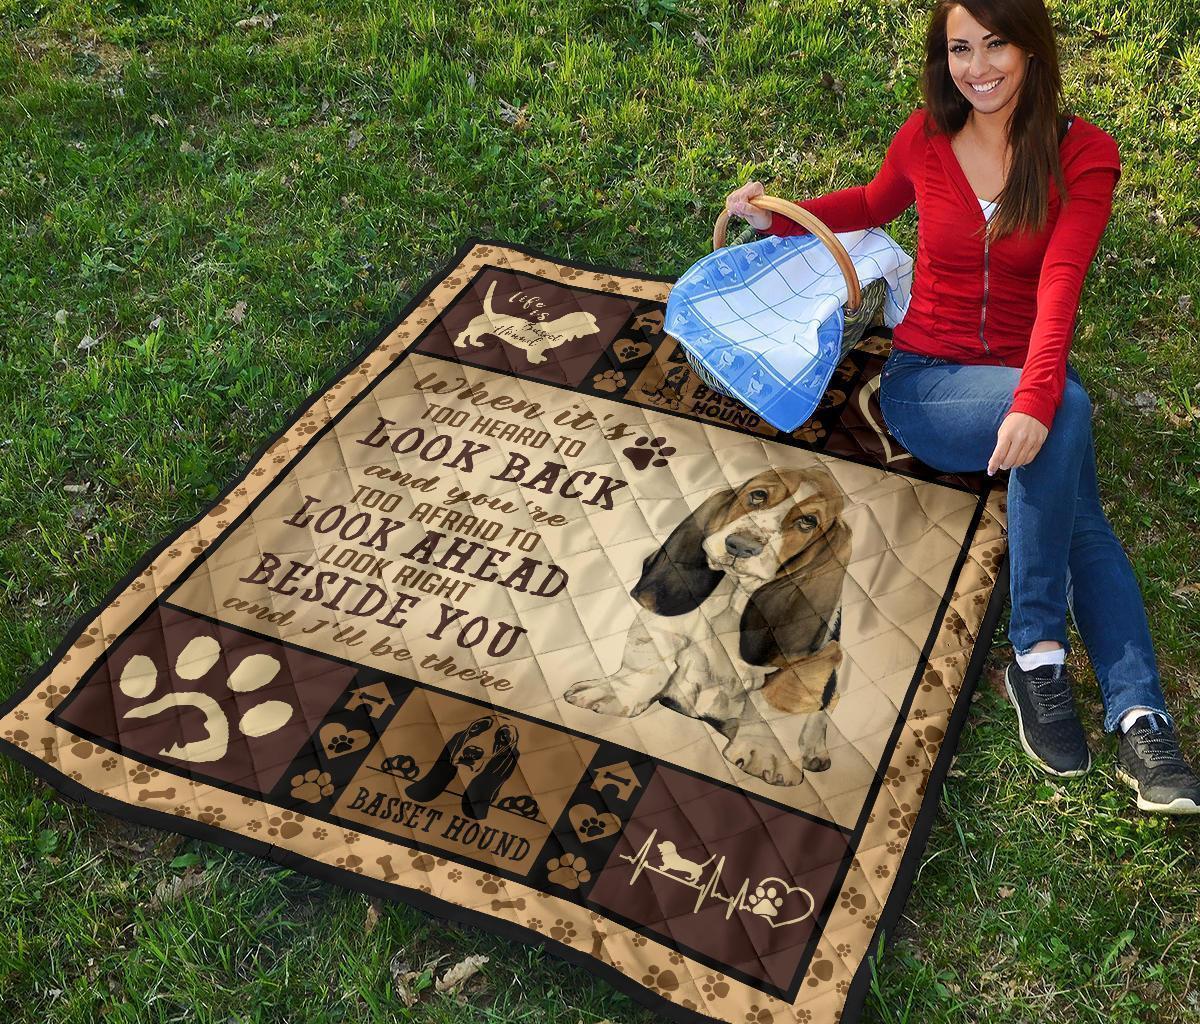 Life Is Better With Basset Hound Quilt Blanket Dog Lover-Gear Wanta